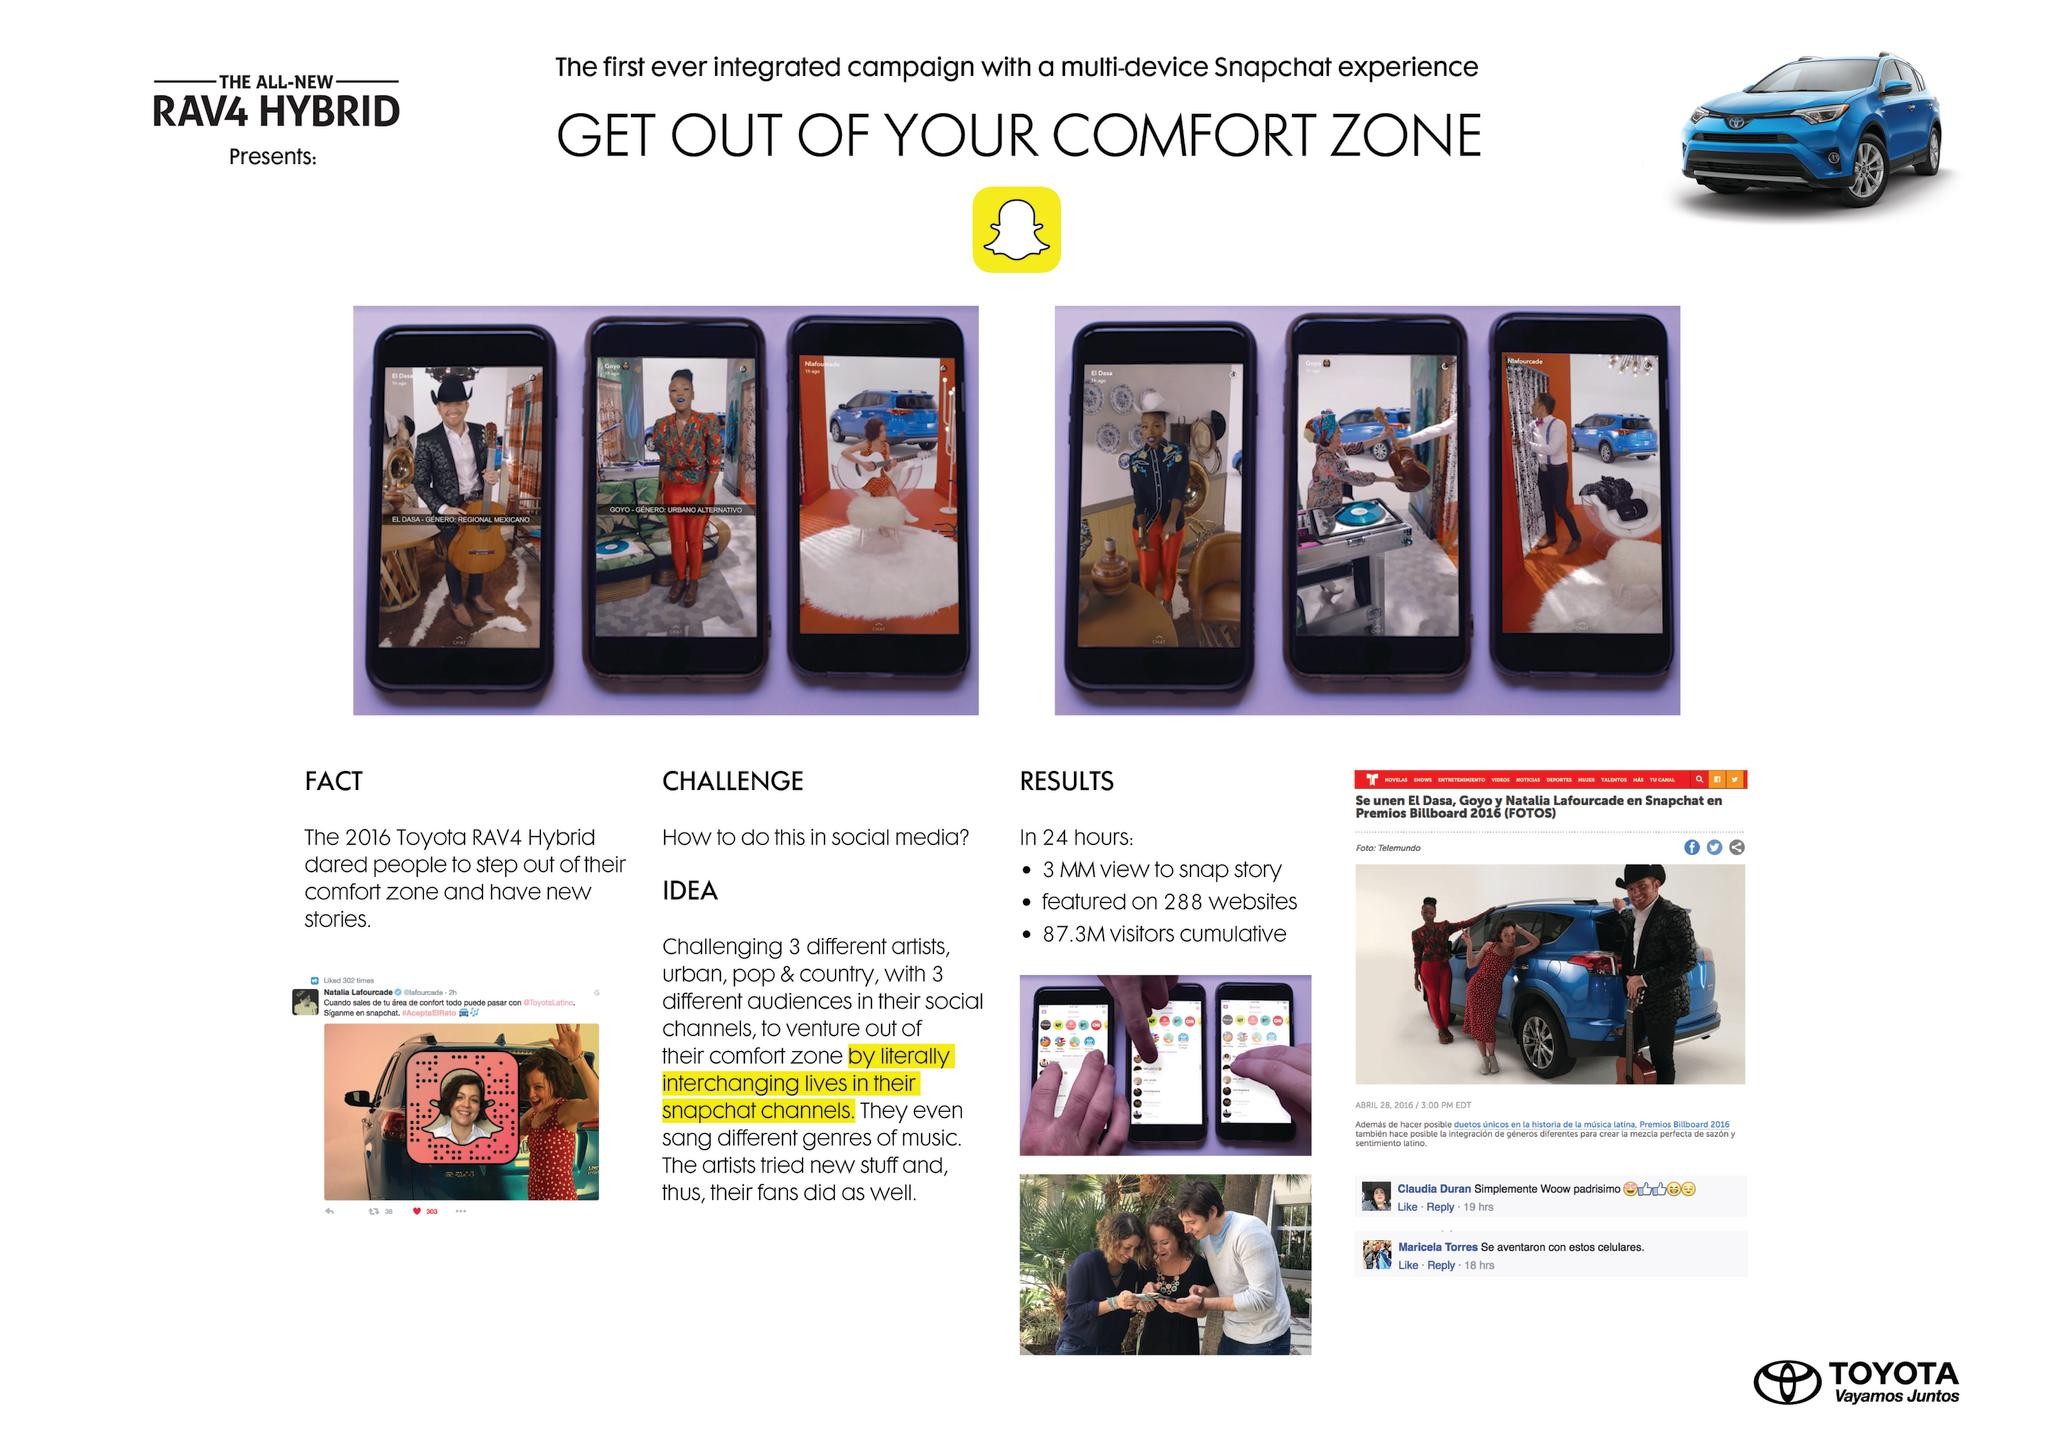 A SNAPCHAT IDEA: GET OUT OF YOUR COMFORT ZONE 